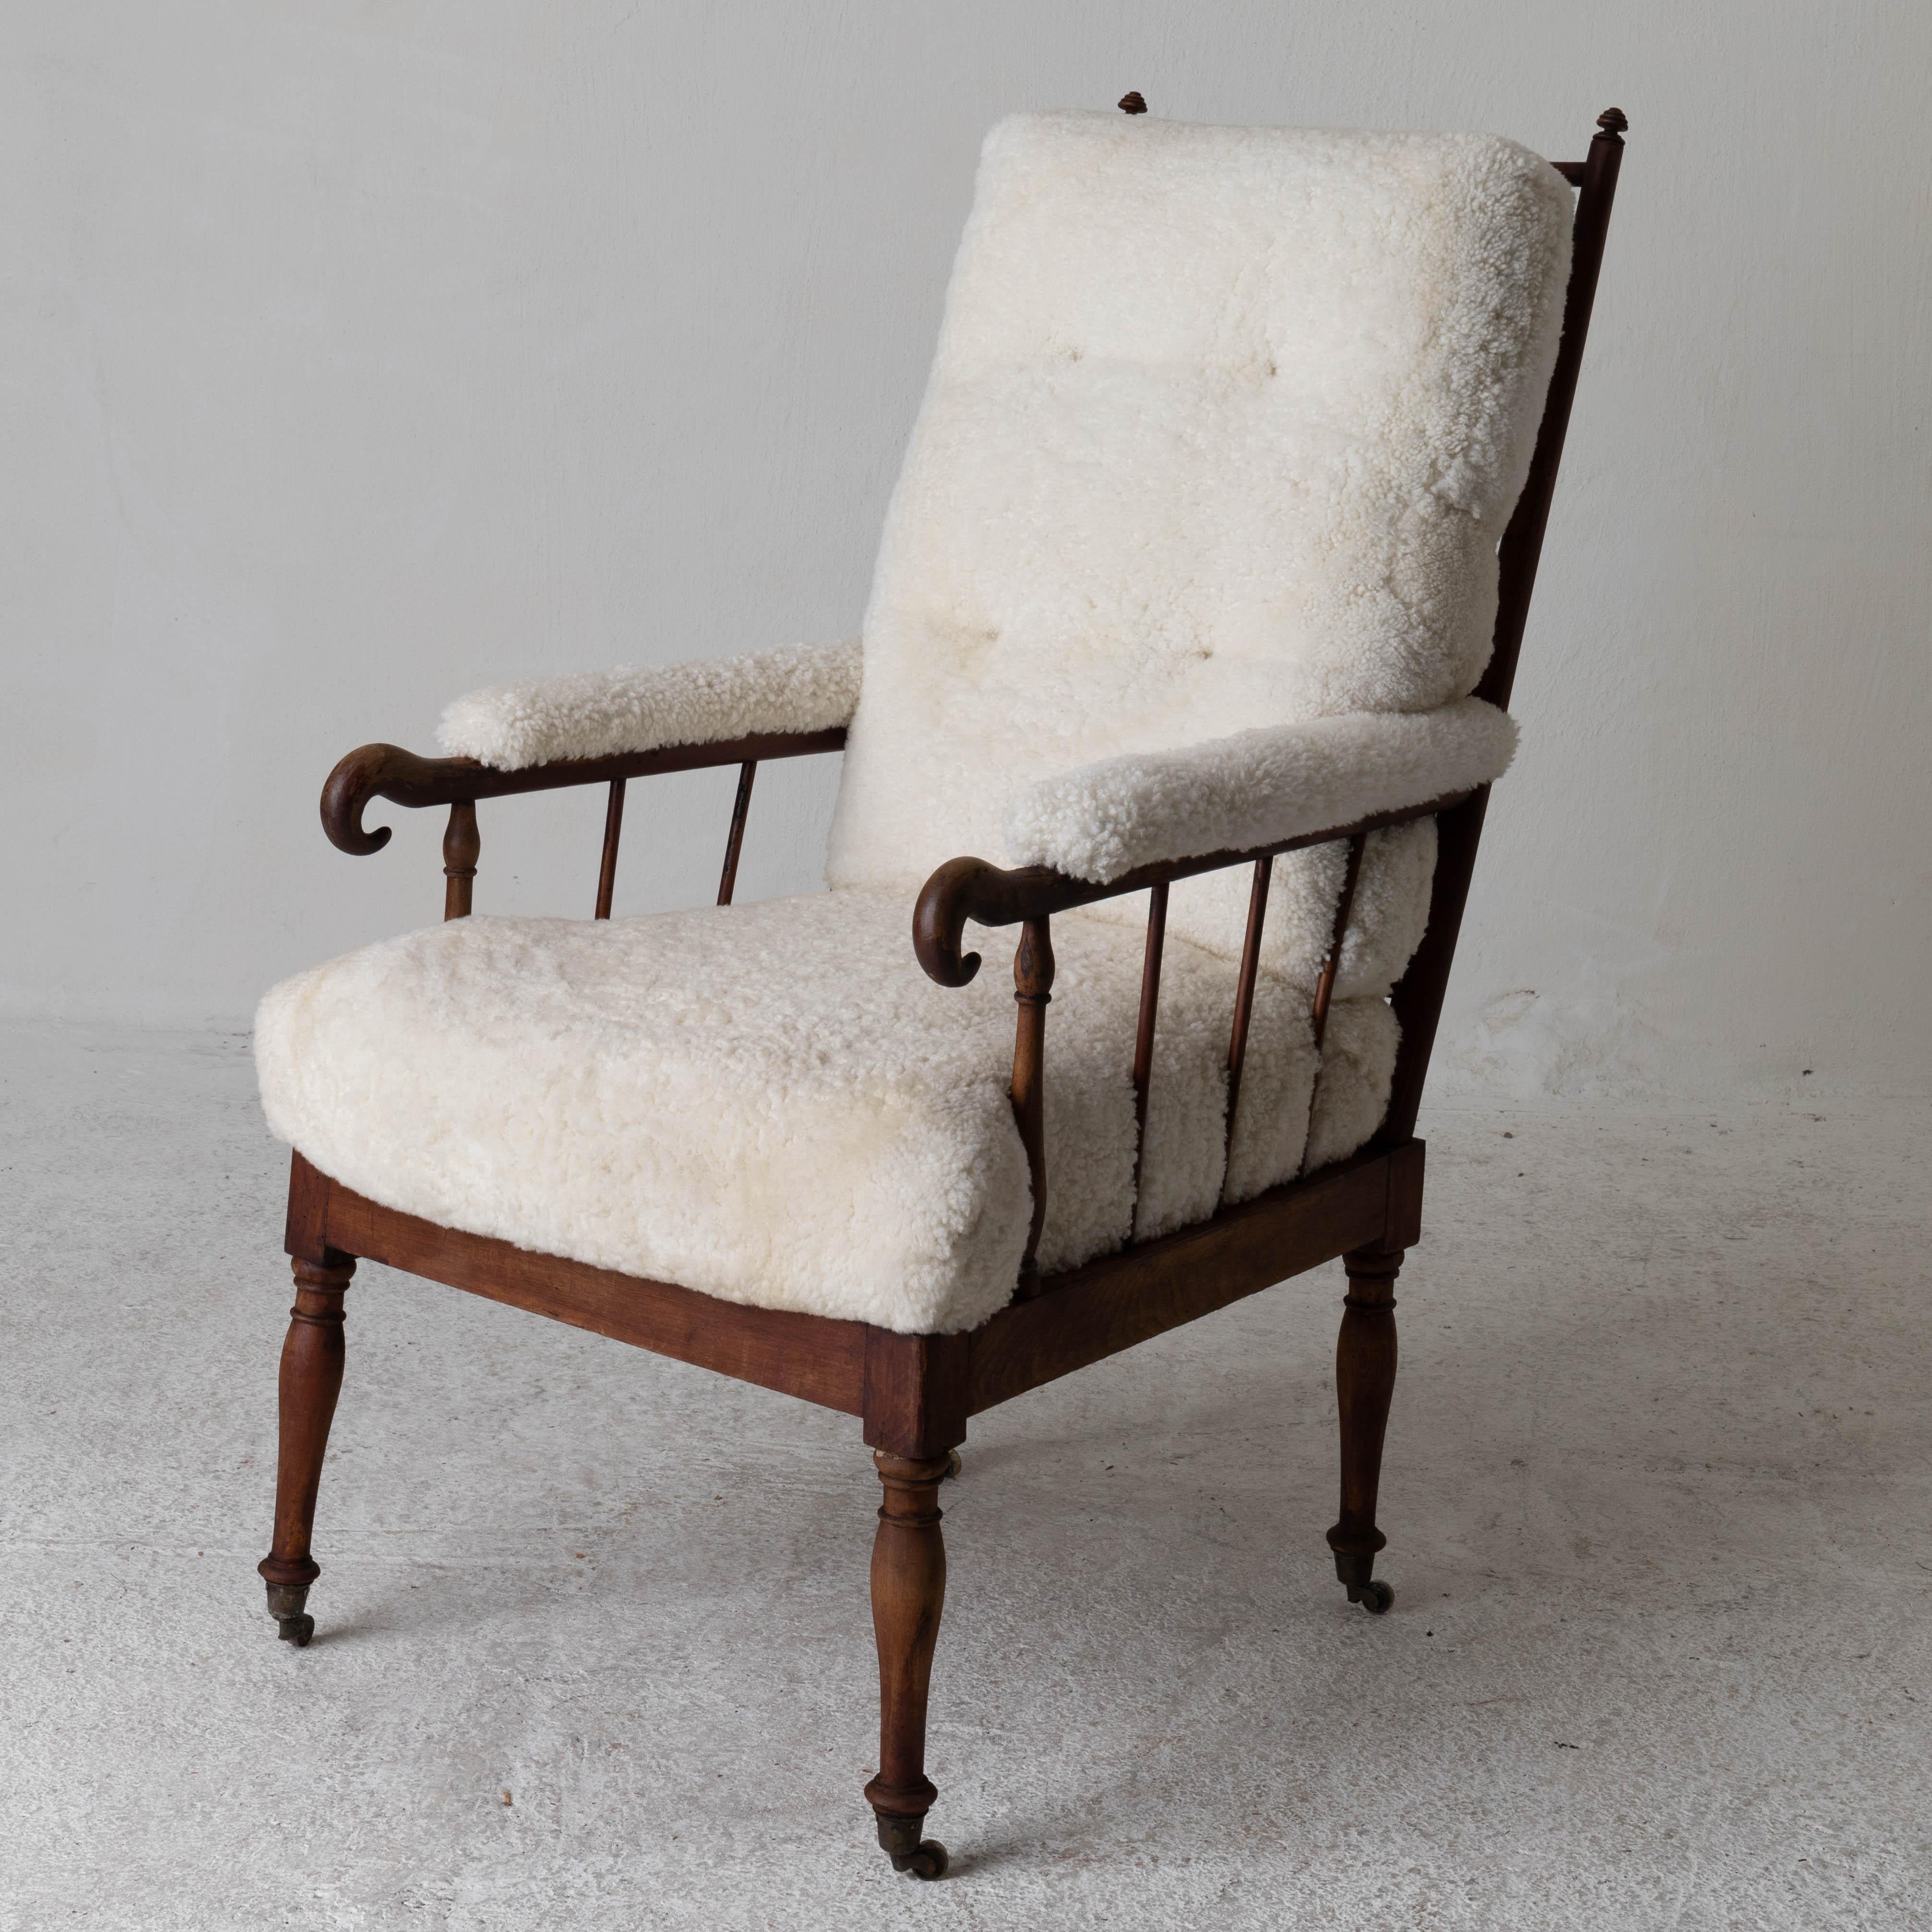 Armchair Swedish Shearling white brown frame 19th century Sweden. An armchair made during the 1840-50s in Sweden. Upholstered in a white shearling. Frame in a mid-brown wood.